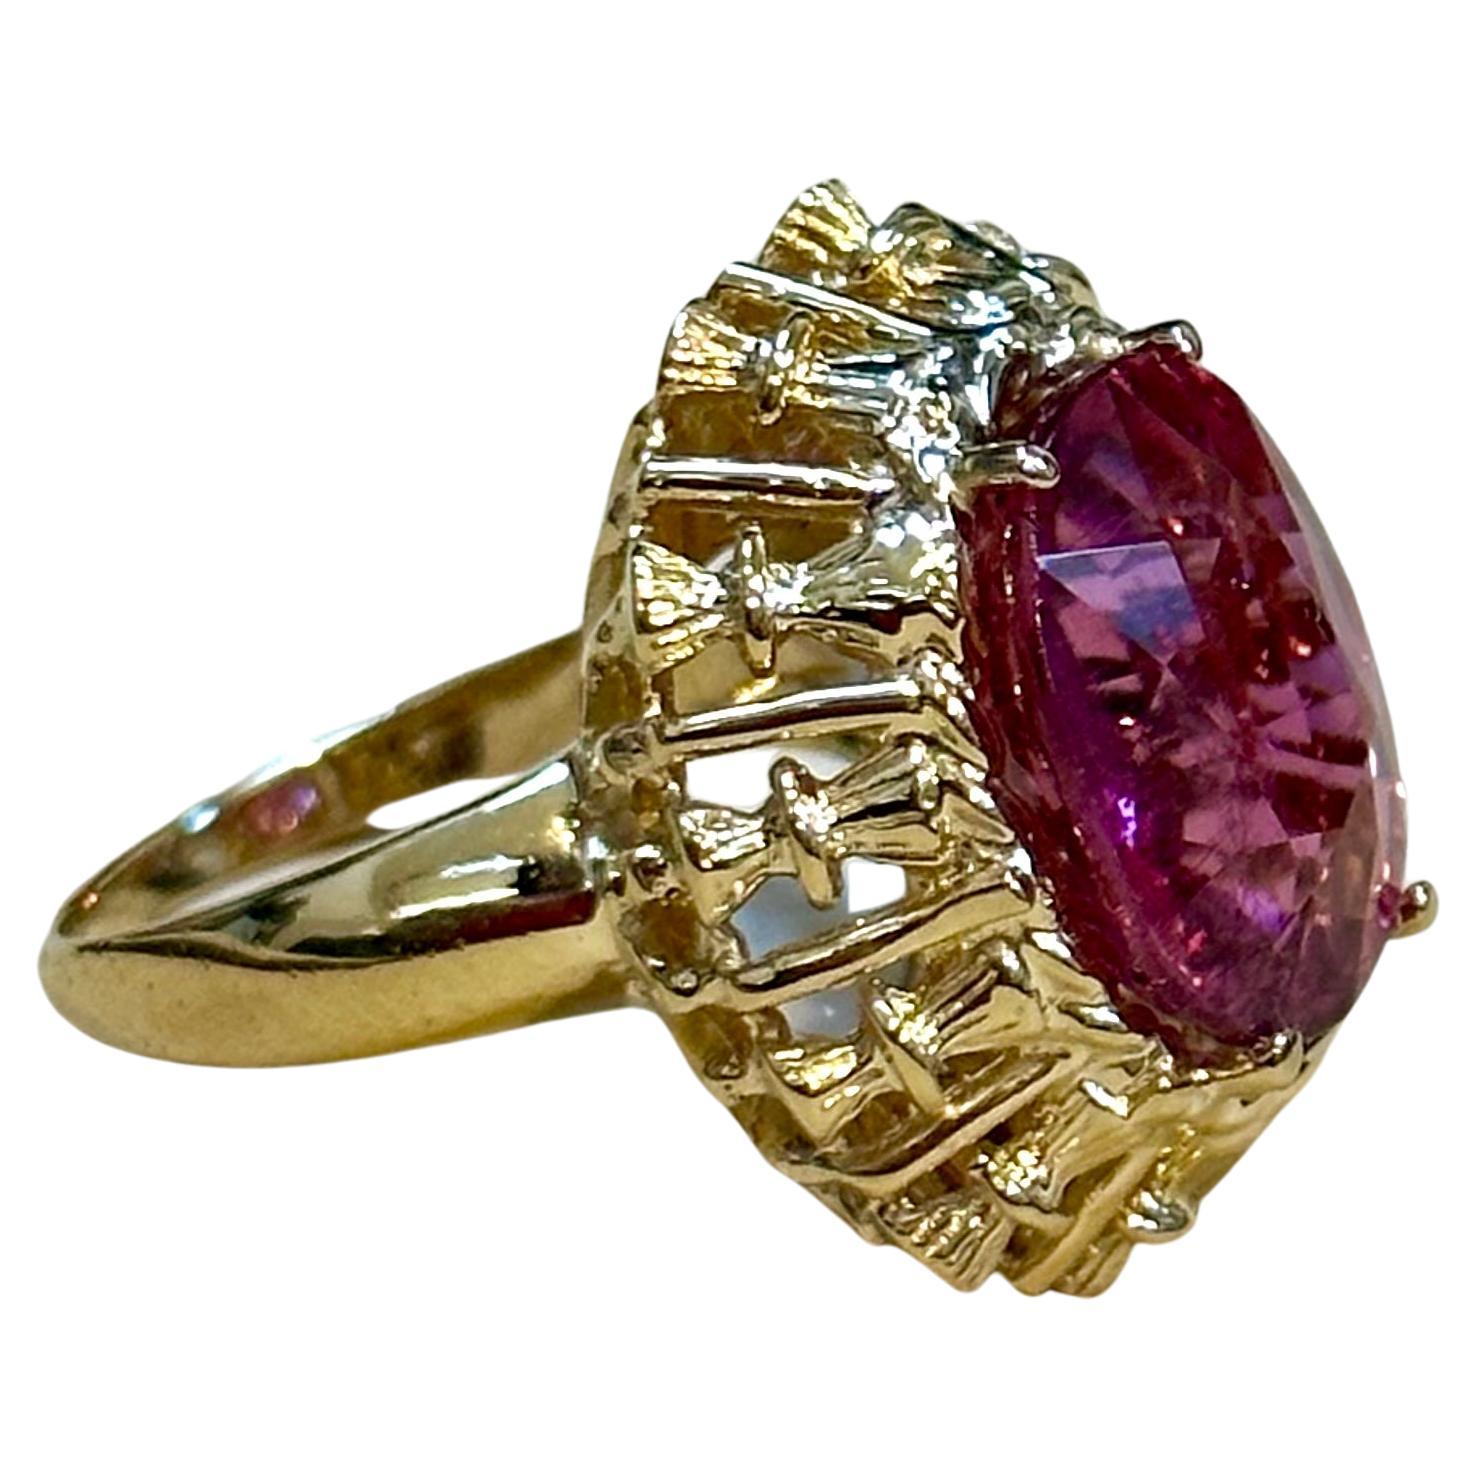 Approximately 6 Carat Oval Cut Natural Pink Tourmaline 14 Karat Yellow Gold Ring Size 5.5
6 Carat of Pink Tourmaline oval shape  surrounded by nice gold design.
Gold: 14 Karat Yellow  gold , Beautiful design
Weight: 10 gram Including stone

Ring